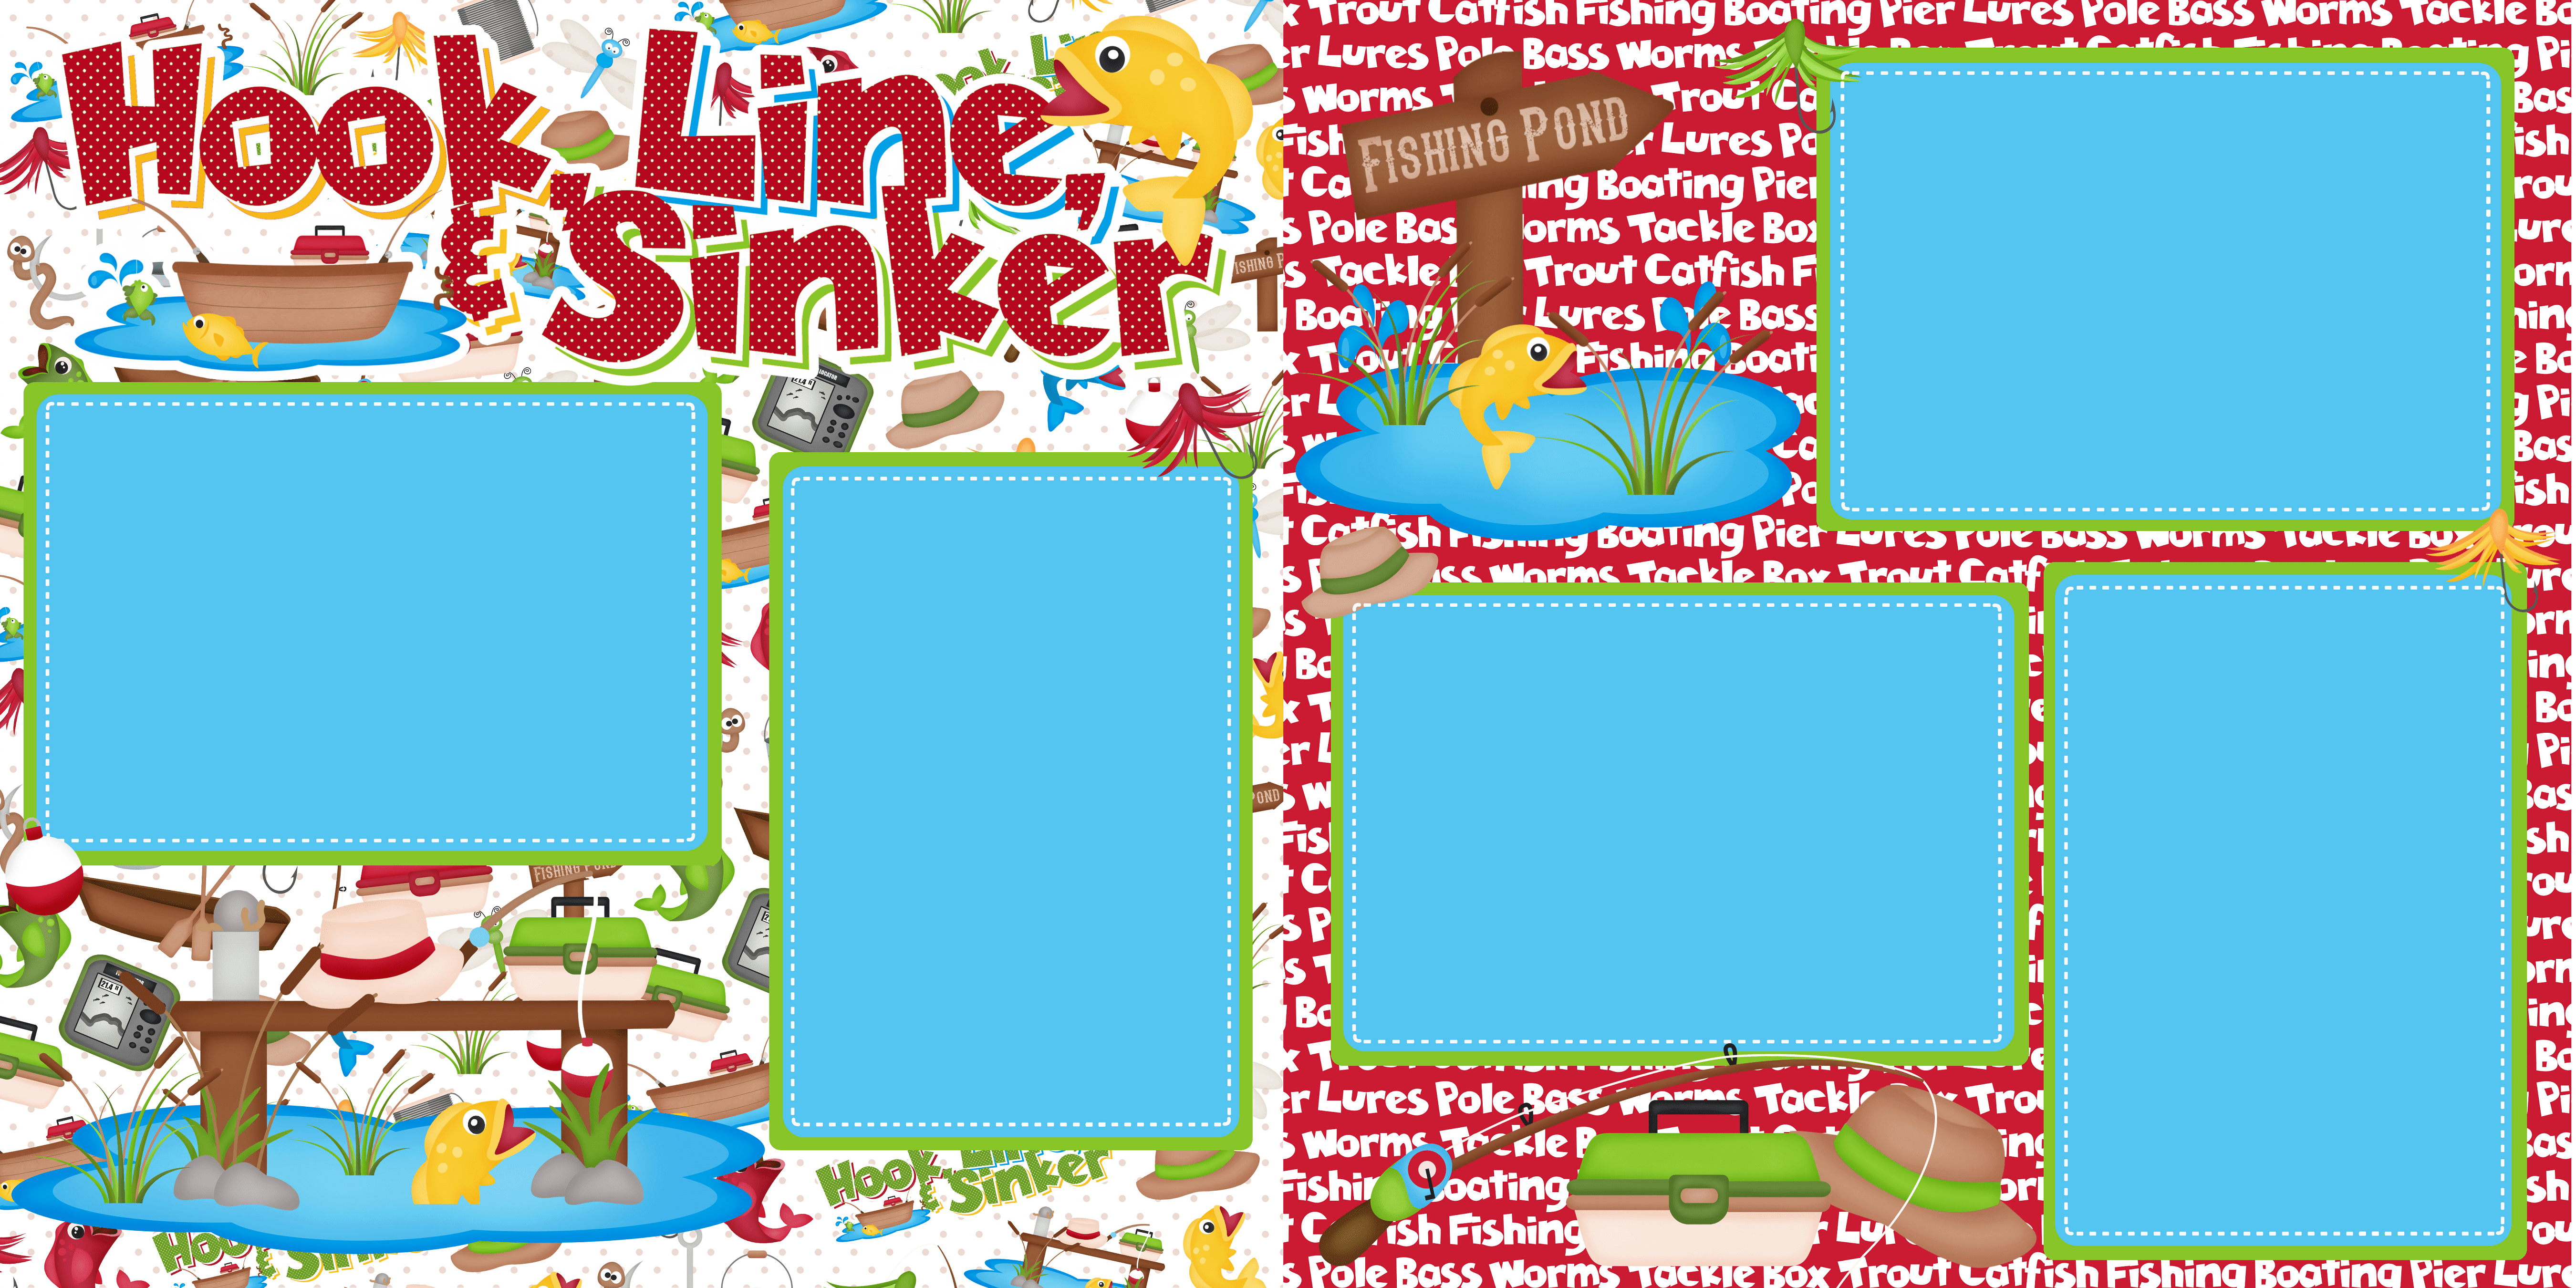 Hook, Line & Sinker Collection Fishing Pond 12 x 12 Double-Sided Scrapbook Papers by SSC Designs - Scrapbook Supply Companies